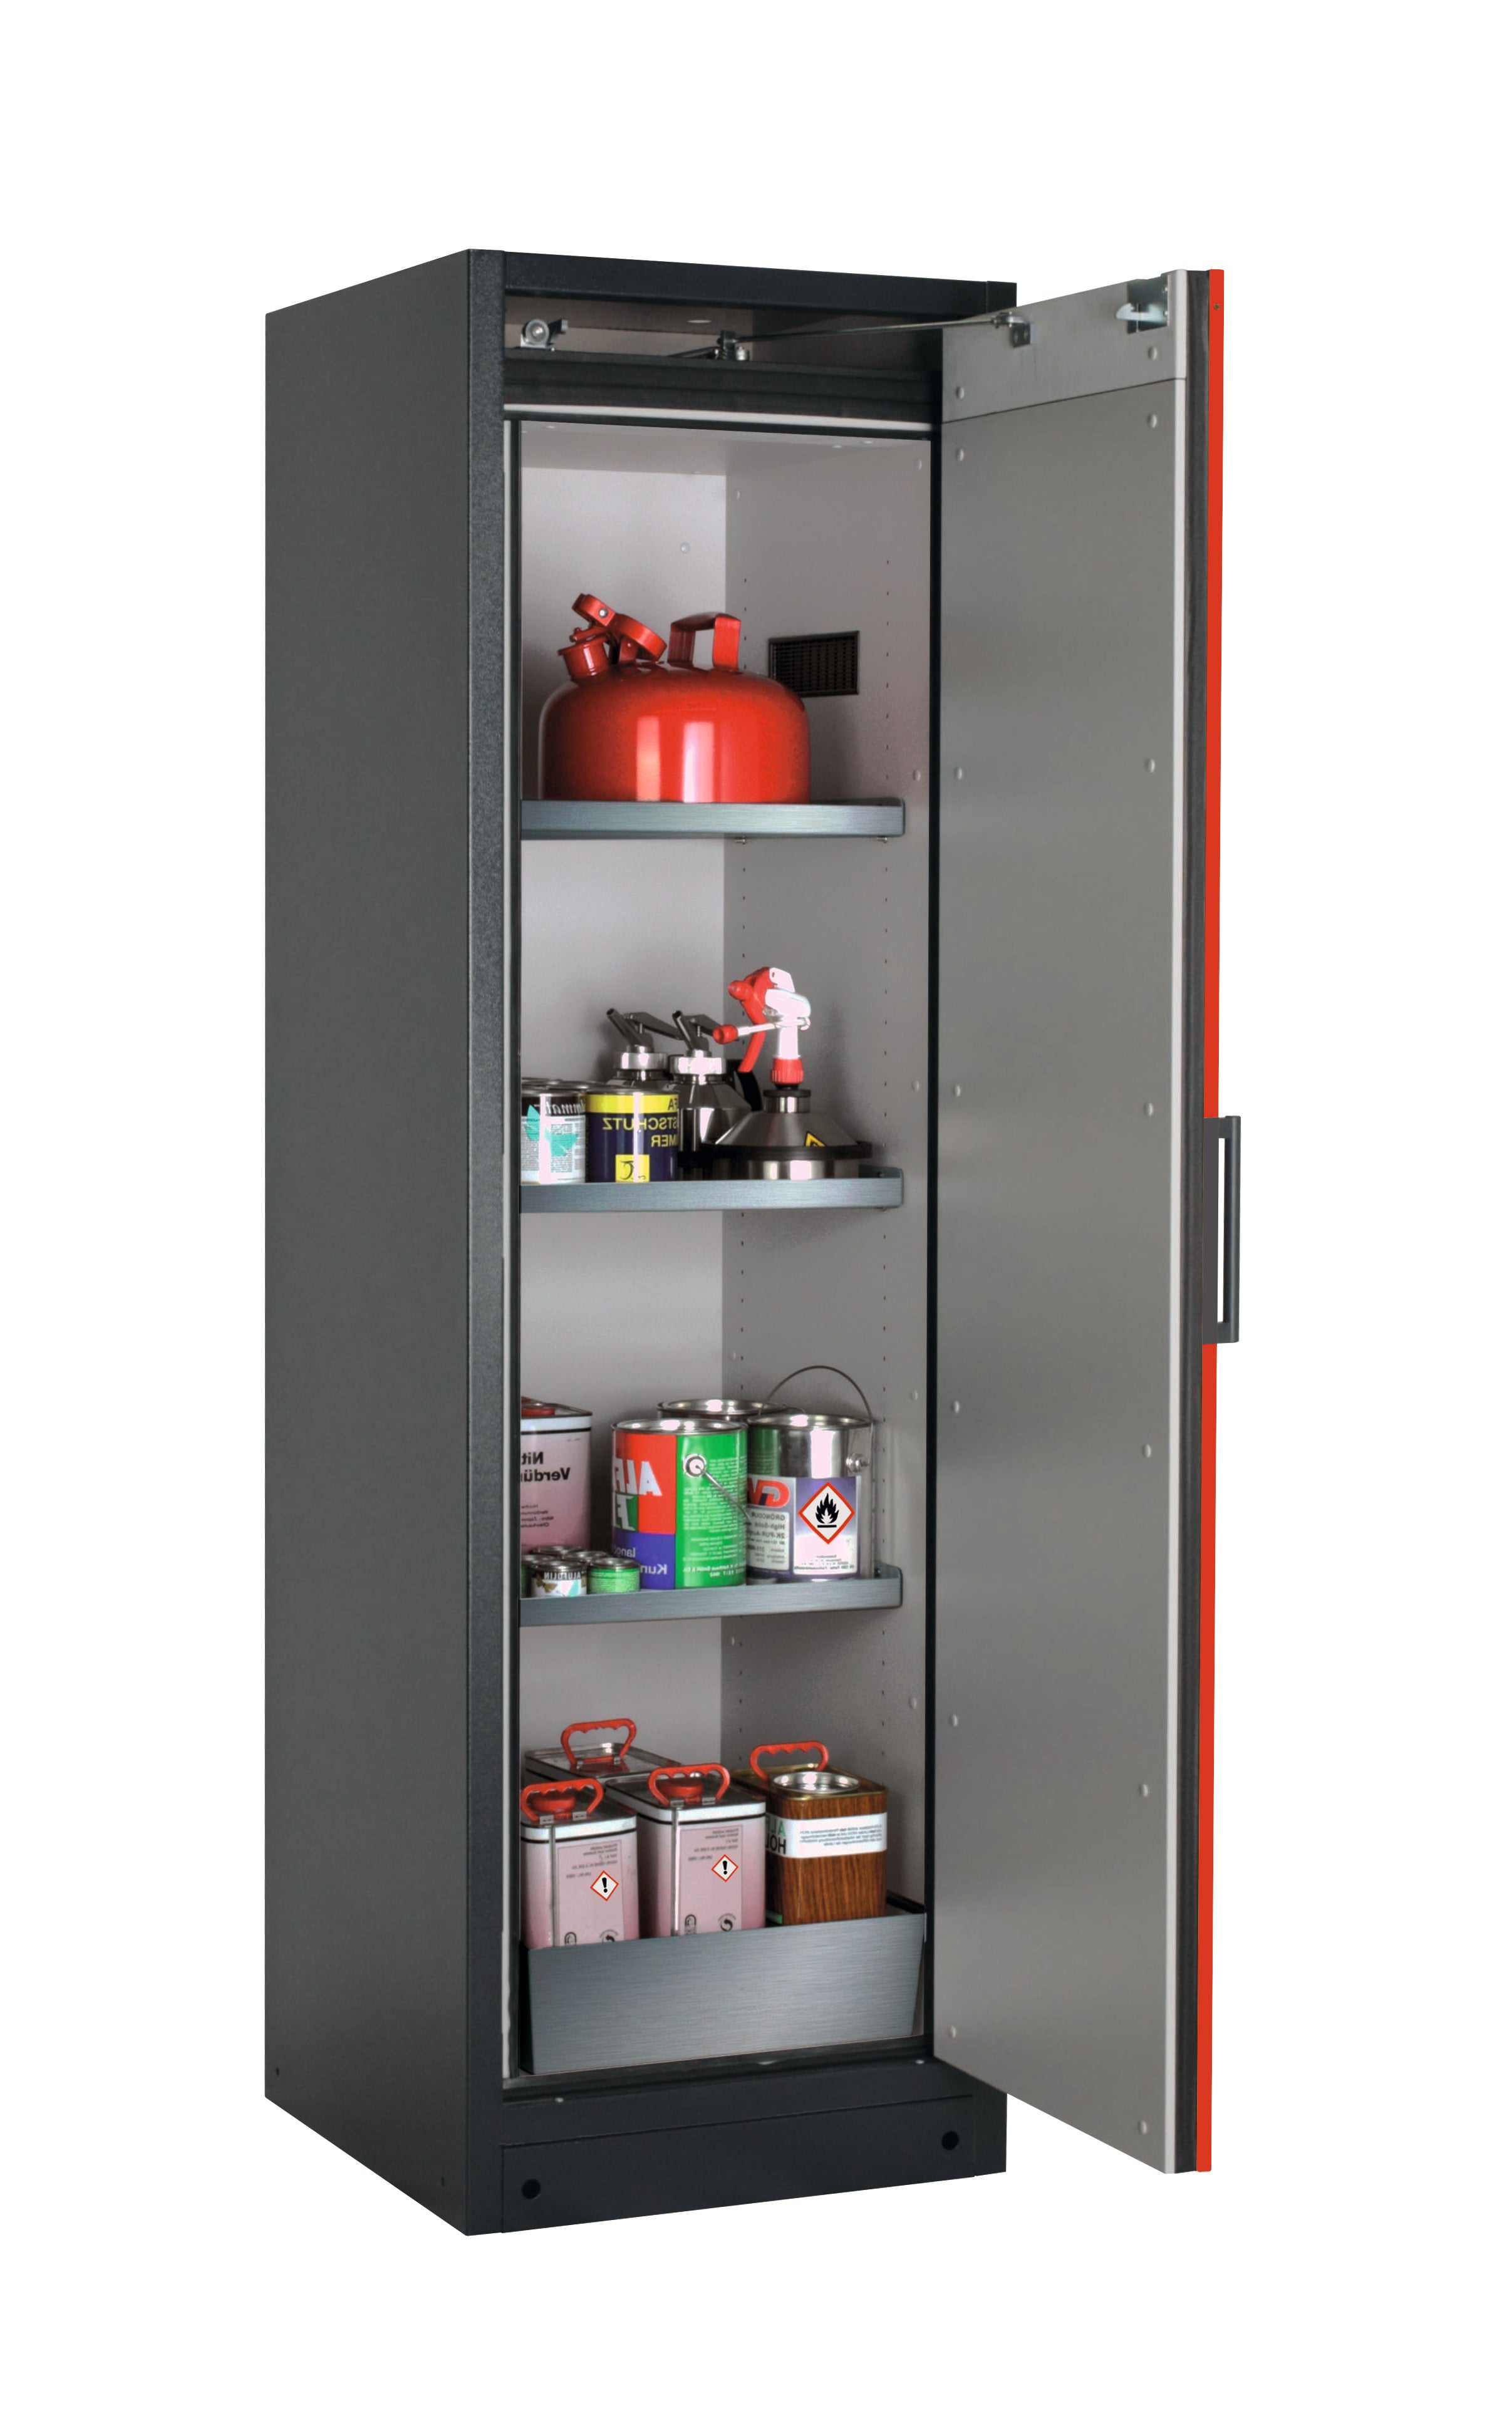 Type 90 safety storage cabinet Q-PEGASUS-90 model Q90.195.060.WDACR in traffic red RAL 3020 with 3x shelf standard (stainless steel 1.4301),